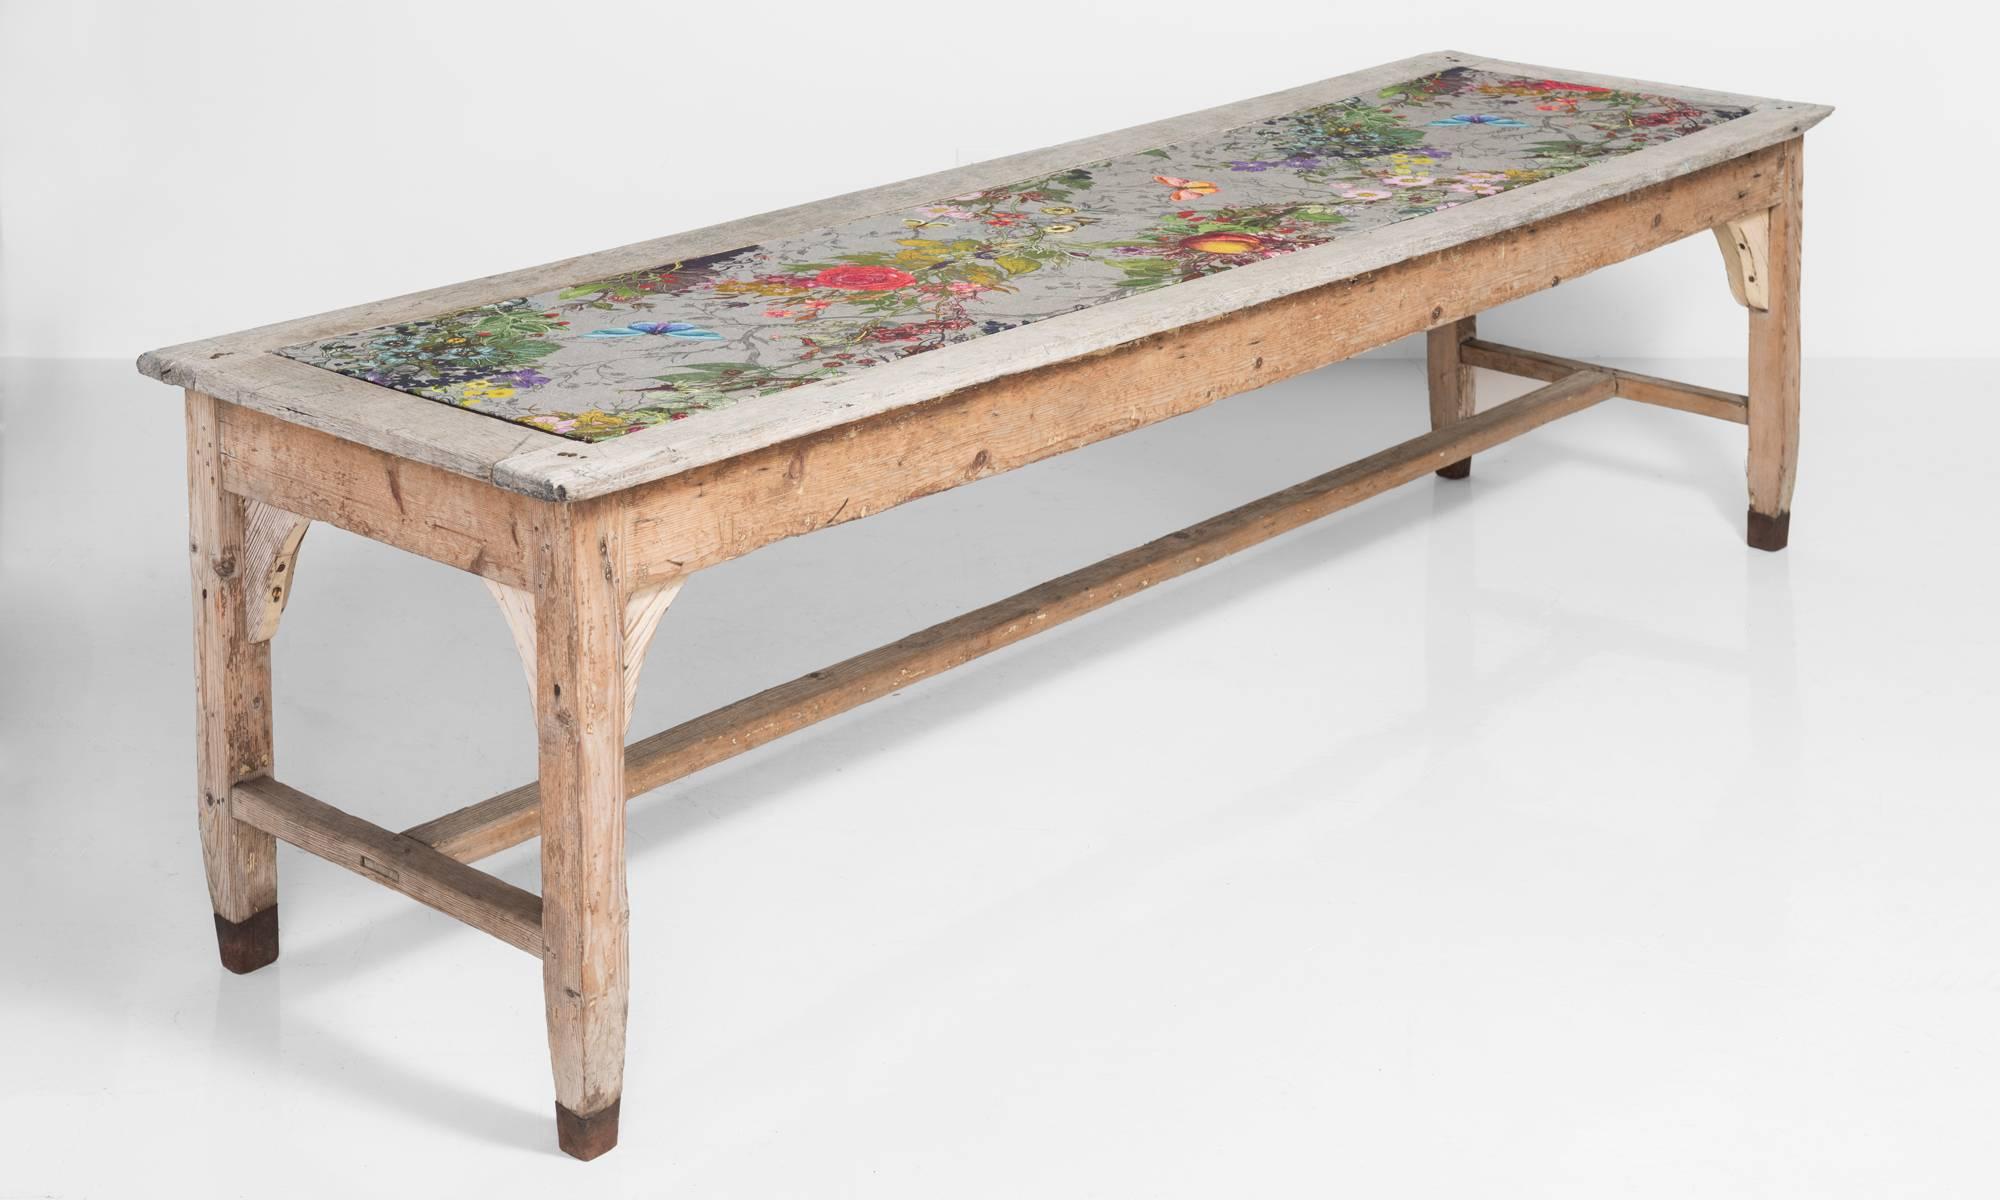 Upholstered Top, Oak and Pine Dining Table, circa 1880

Inset metal top upholstered in floral Timorous Beasties fabric on pine surround and pine base.